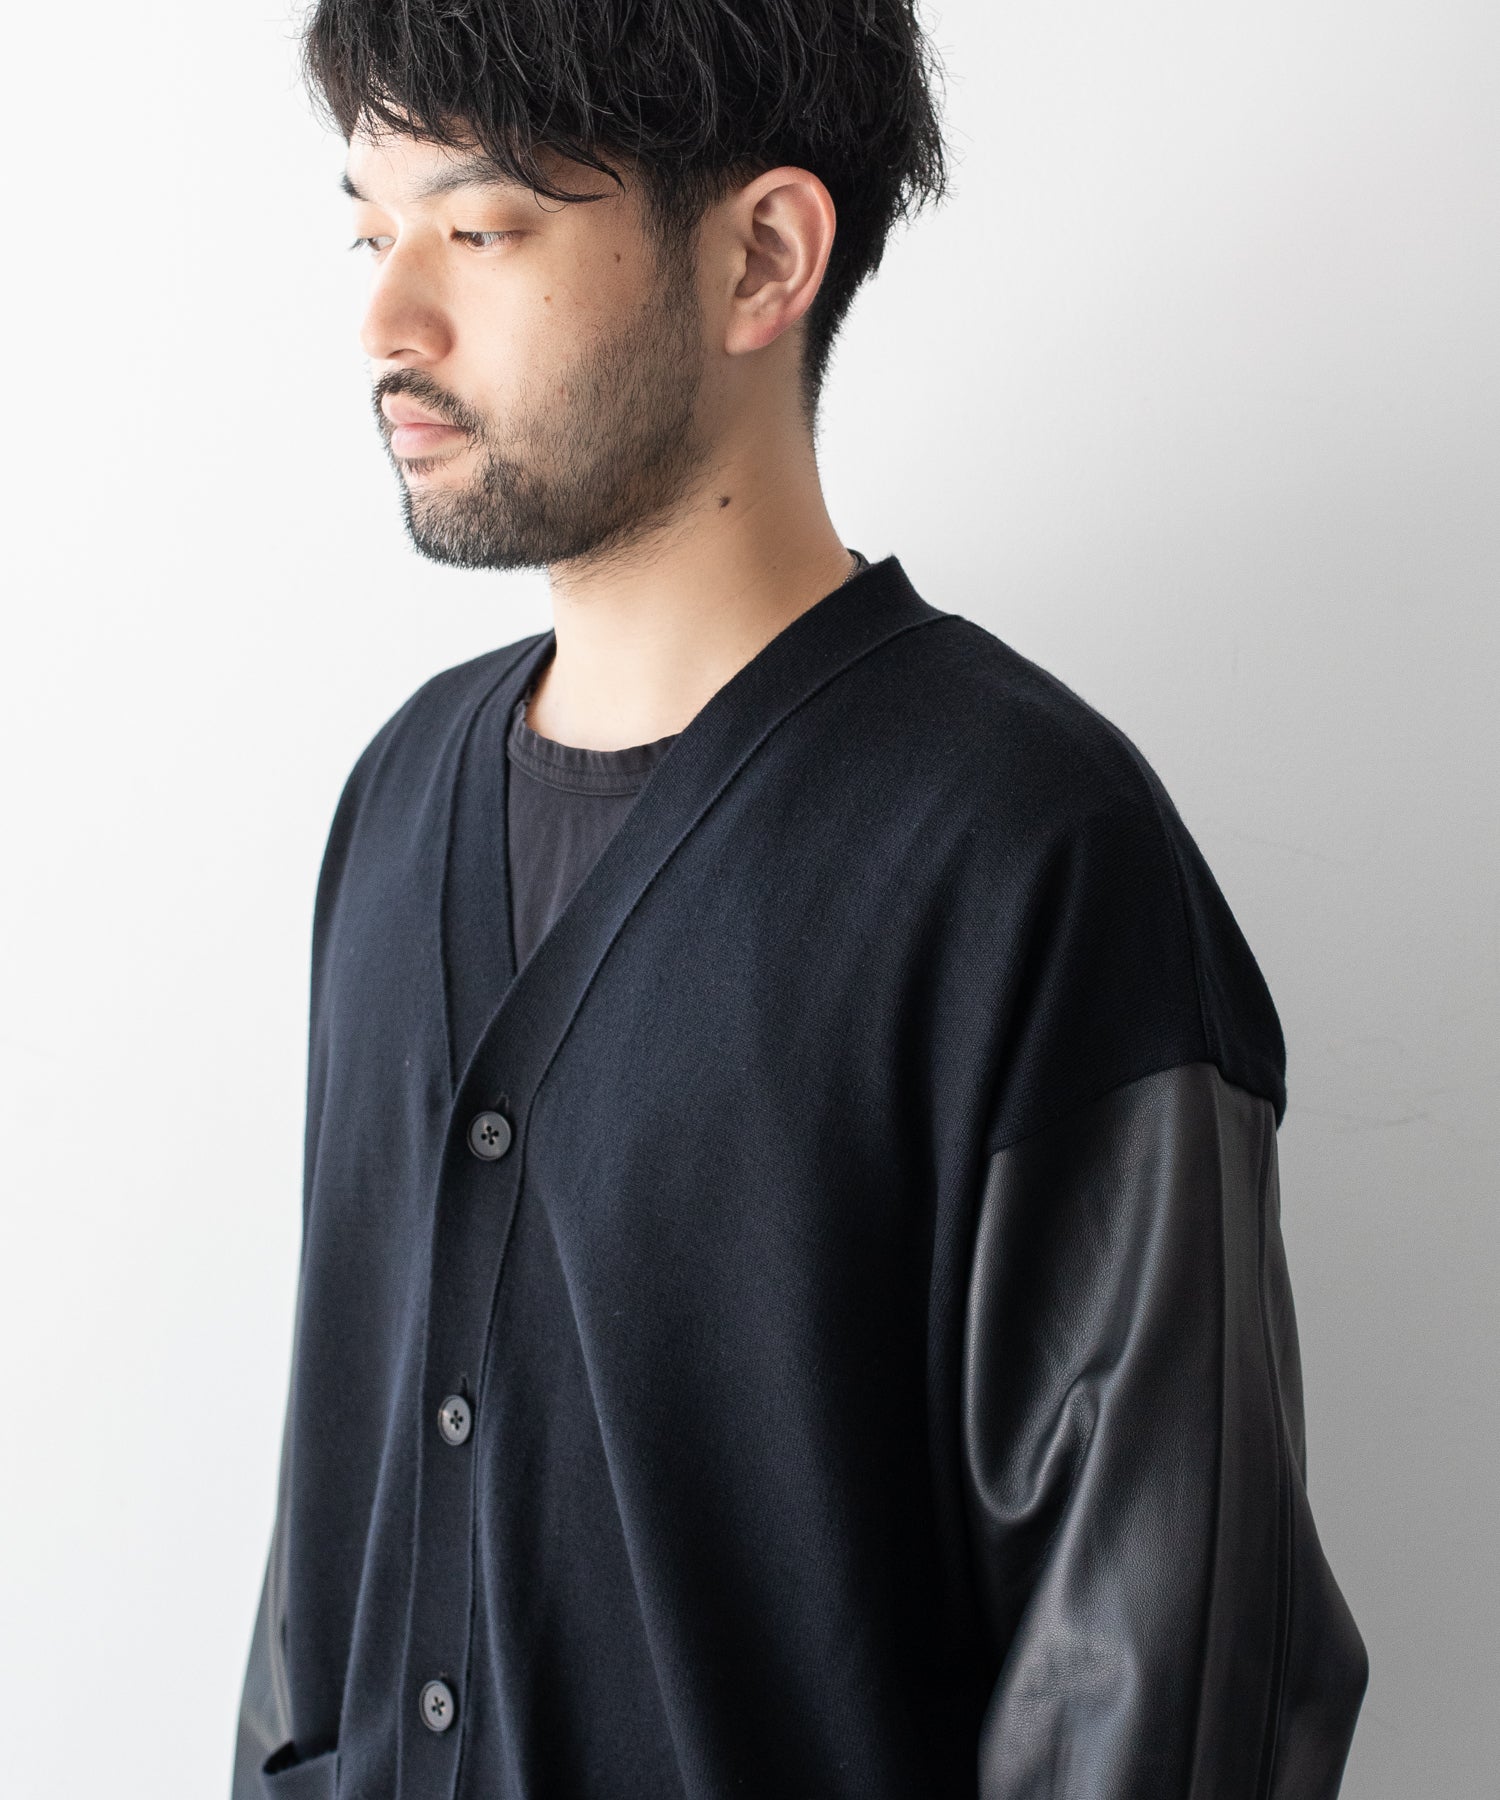 stein(シュタイン)の23AWコレクションLEATHER SLEEVES HIGH COUNT KNIT CARDIGANのBLACK × BLACK(LEATHER)